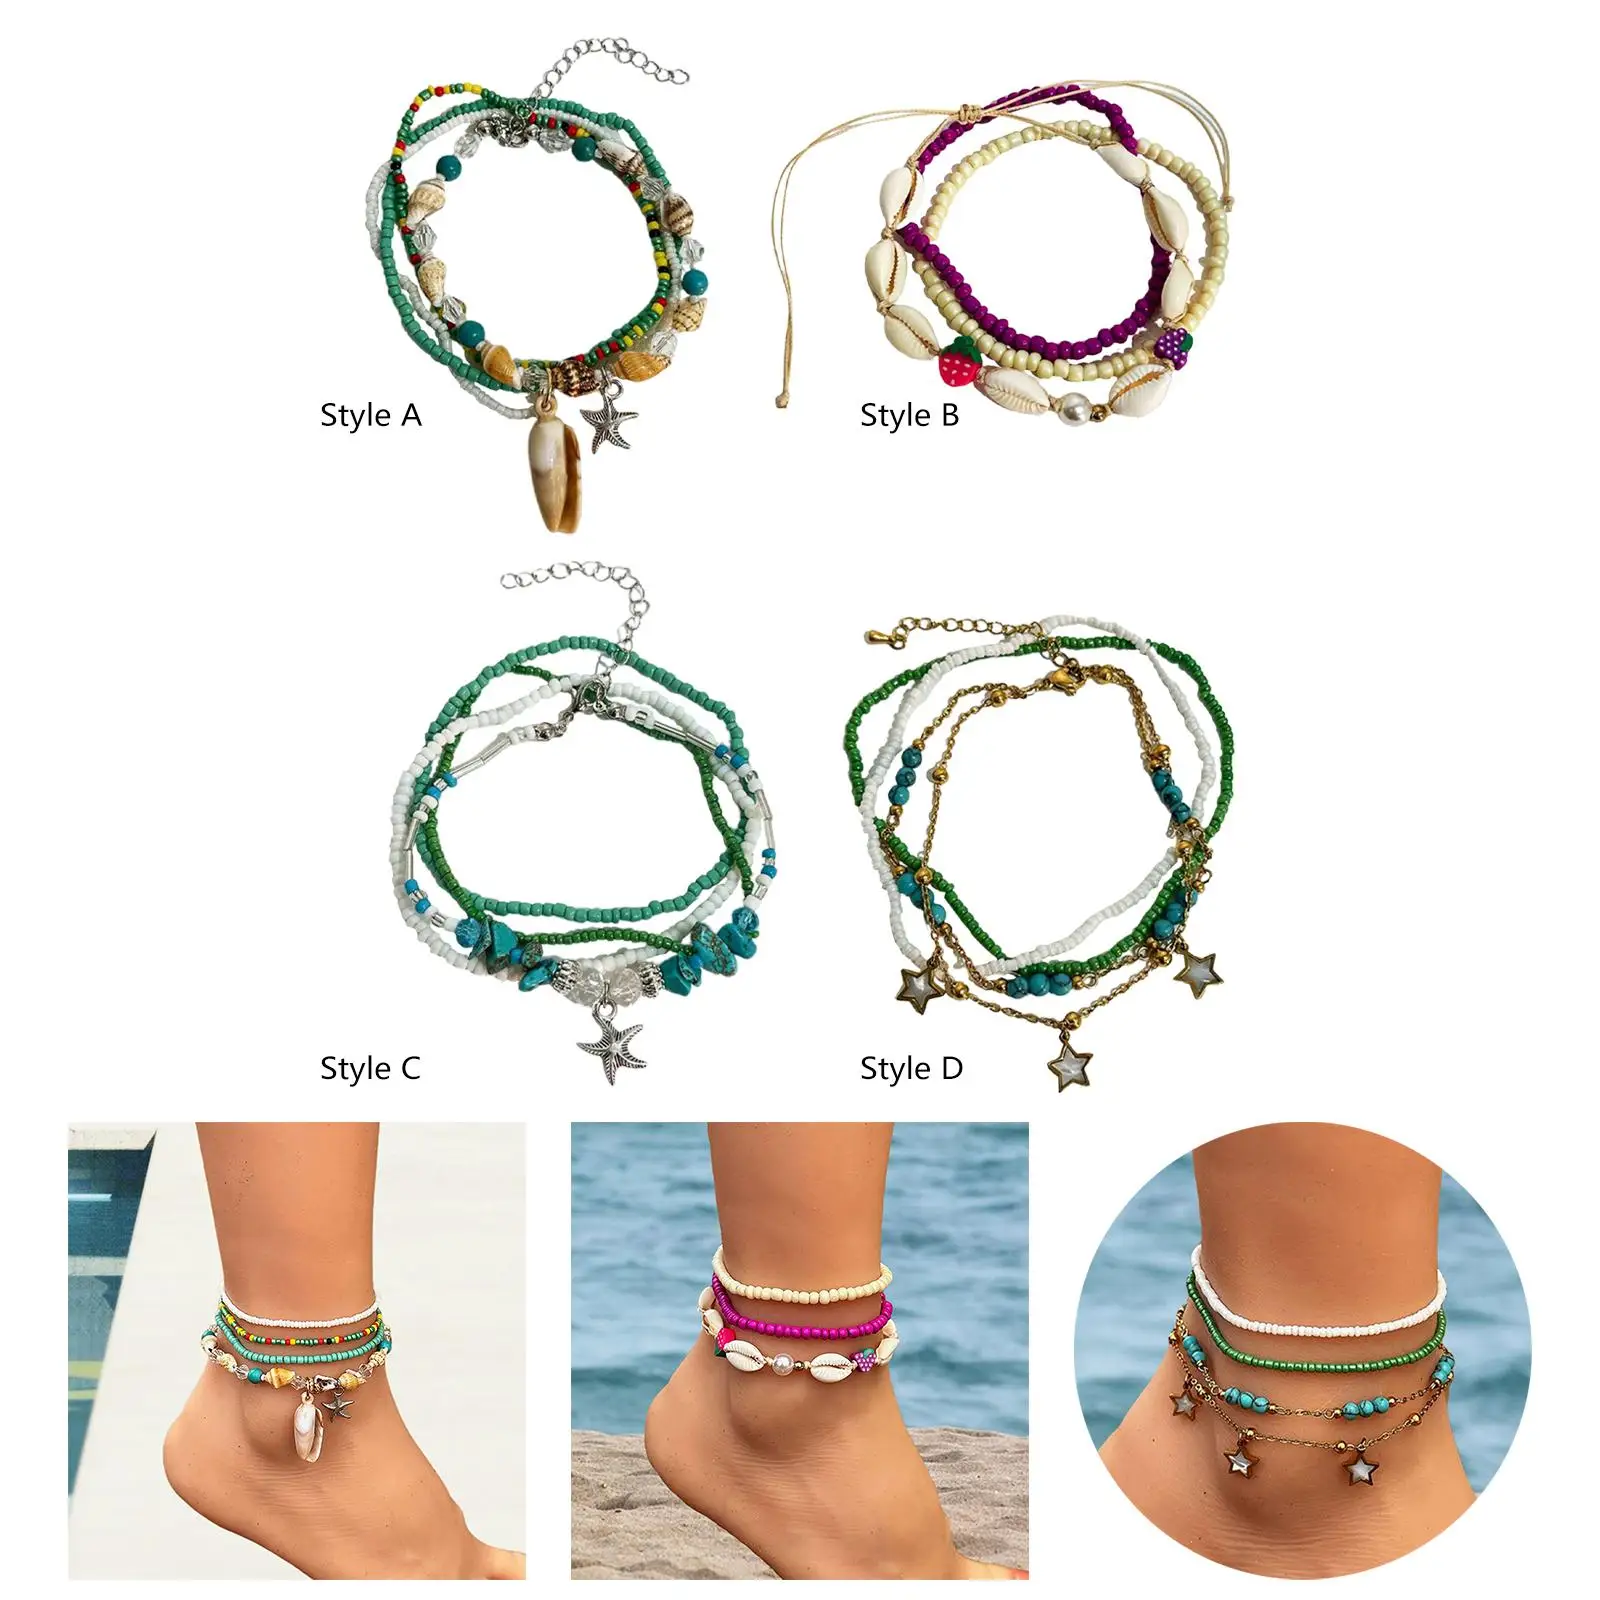 Beaded Anklets Boho Foot Jewelry Layered Anklet Set for Summer Surfer Bikini